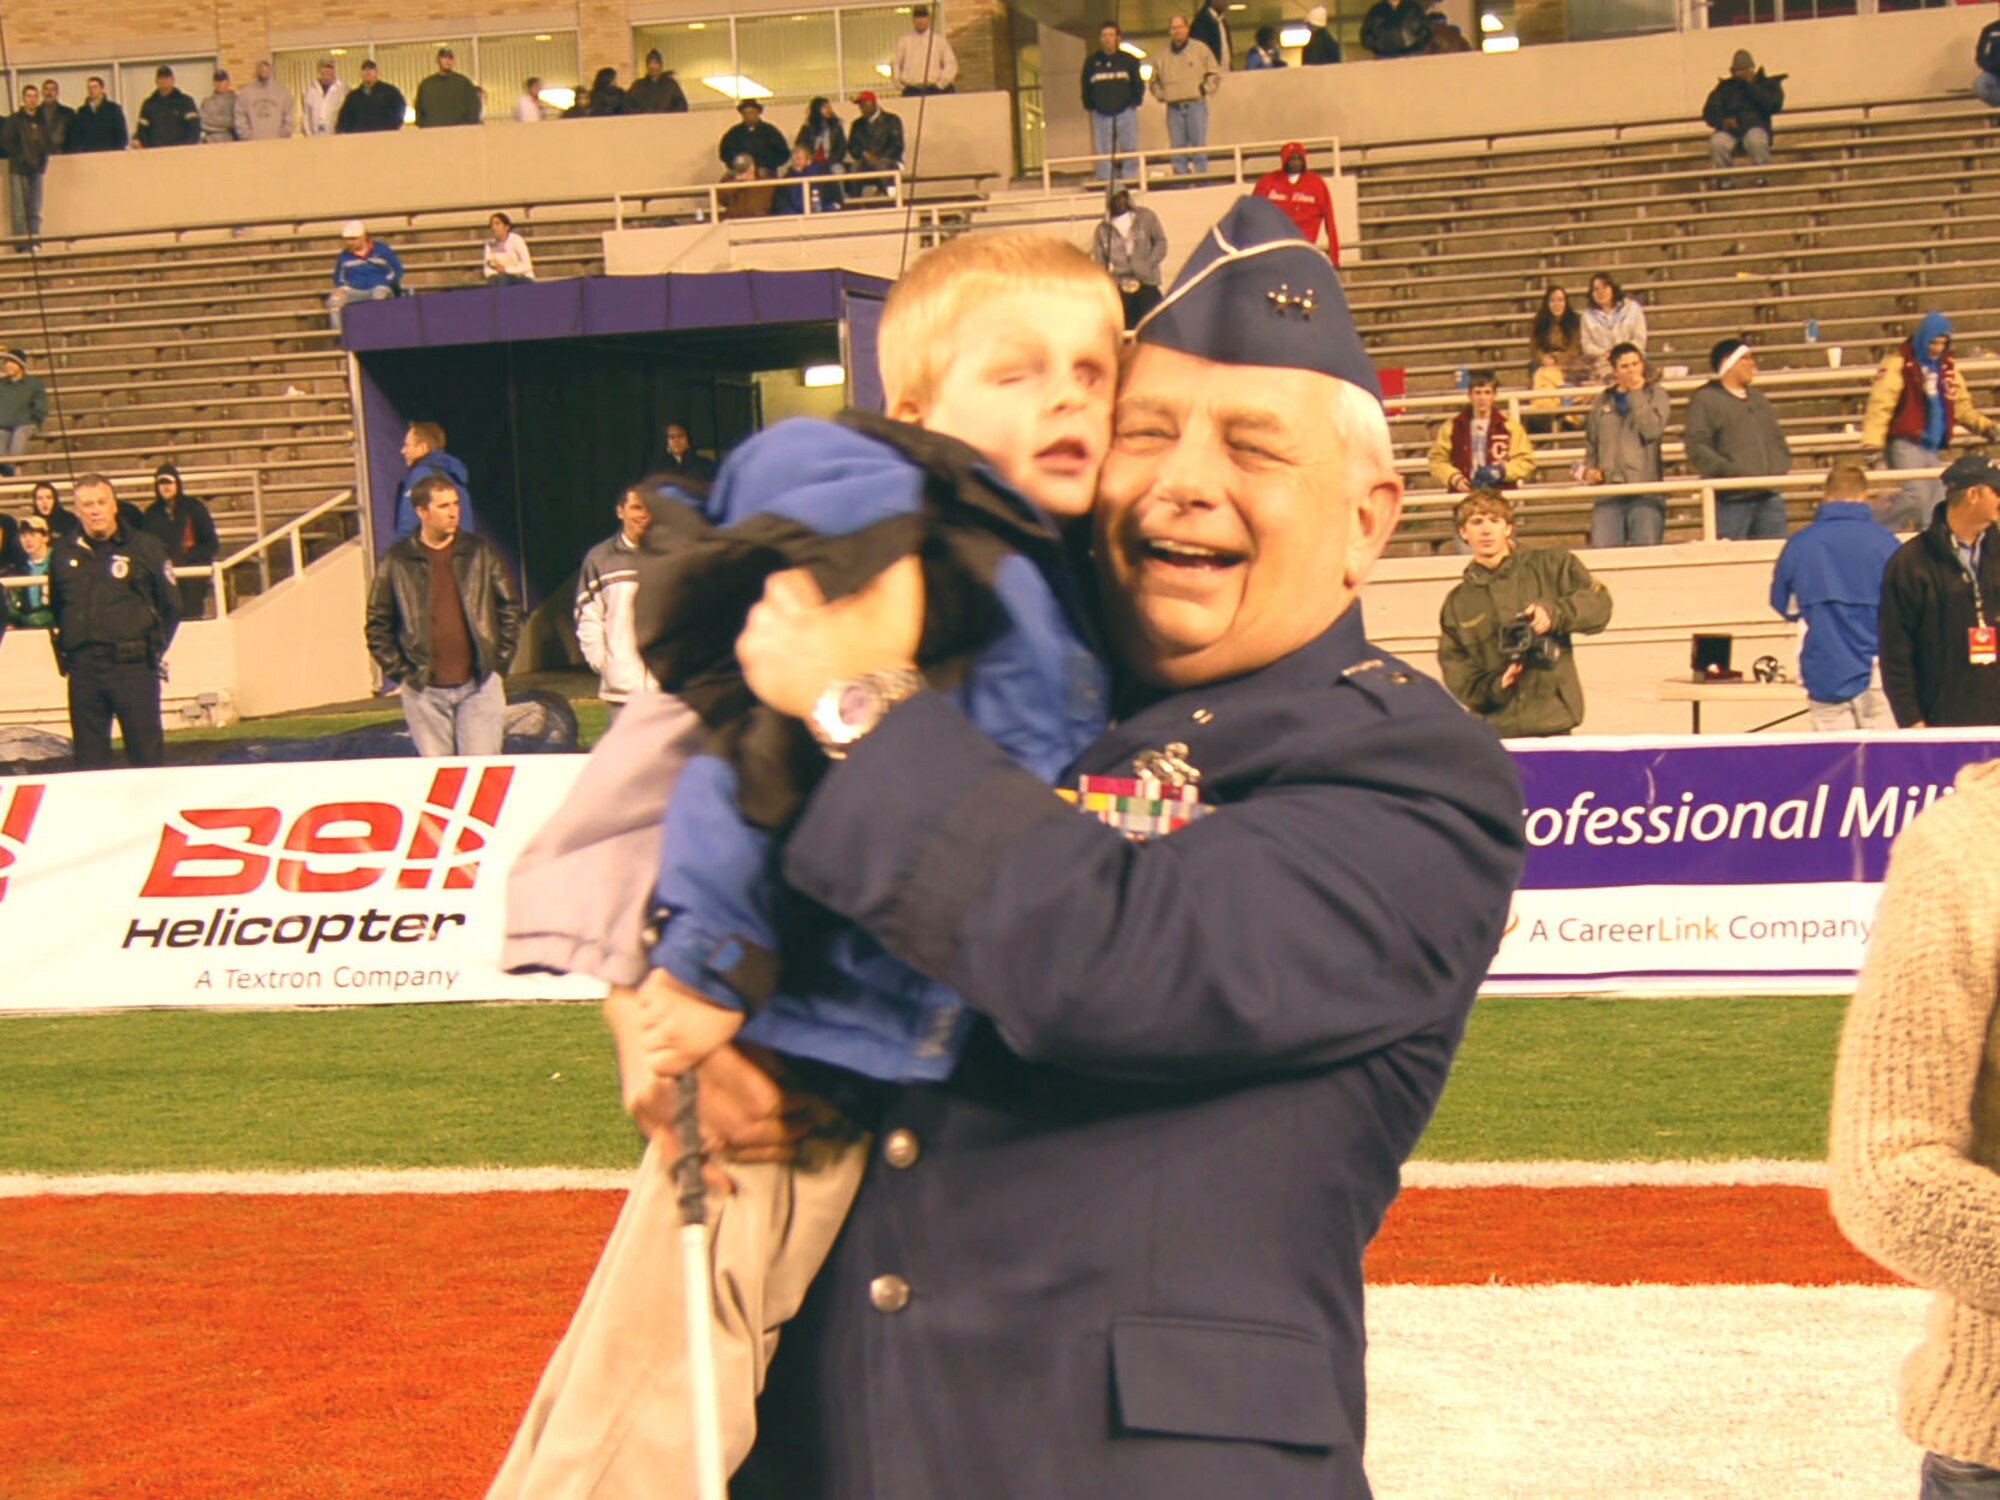 Maj. Gen. Allen R. Dehnert, assistant adjutant general and commander, Texas Air National Guard, hugs 5-year-old Sawyer Deevers, a boy with vision impairment from Iowa. Sawyer has been a big contributor to Connect and Join, and has sent messages of support written in Braille to servicemembers deployed overseas. Sawyer's pages were part of several scrapbooks presented to the general to send to the troops overseas. The presentation was part of the Bell Helicopter Armed Forces Bowl in Fort Worth, Texas, Dec. 23. (U.S. Air Force photo/Annette Crawford)